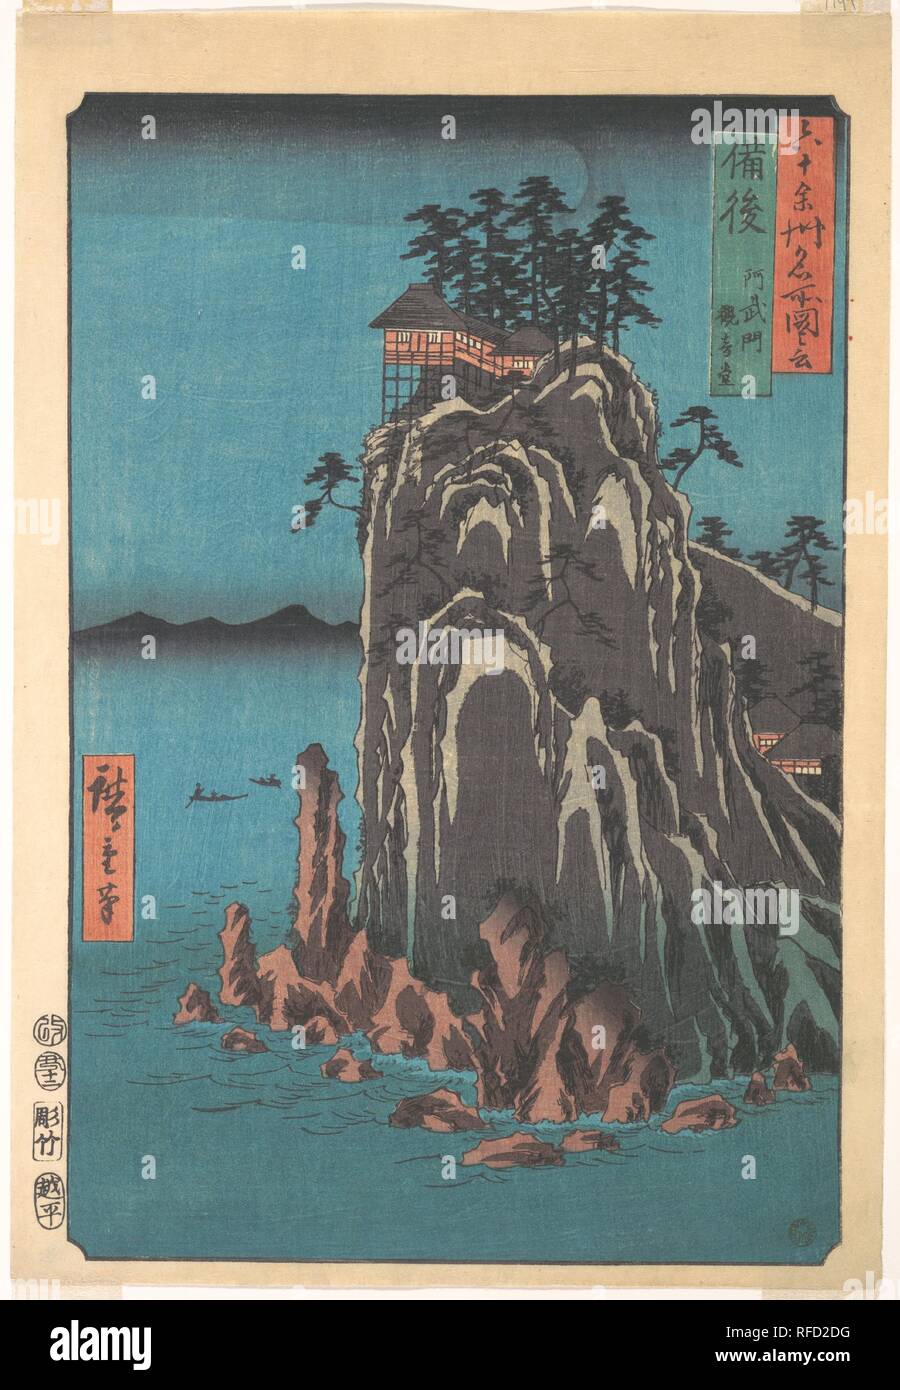 Kannondo, Abuto, Bingo Province, from the series Views of Famous Places in the Sixty-Odd Provinces. Artist: Utagawa Hiroshige (Japanese, Tokyo (Edo) 1797-1858 Tokyo (Edo)). Culture: Japan. Dimensions: H. 14 5/8 in. (37.1 cm); W. 10 1/15 in. (25.6 cm). Date: ca. 1853. Museum: Metropolitan Museum of Art, New York, USA. Stock Photo